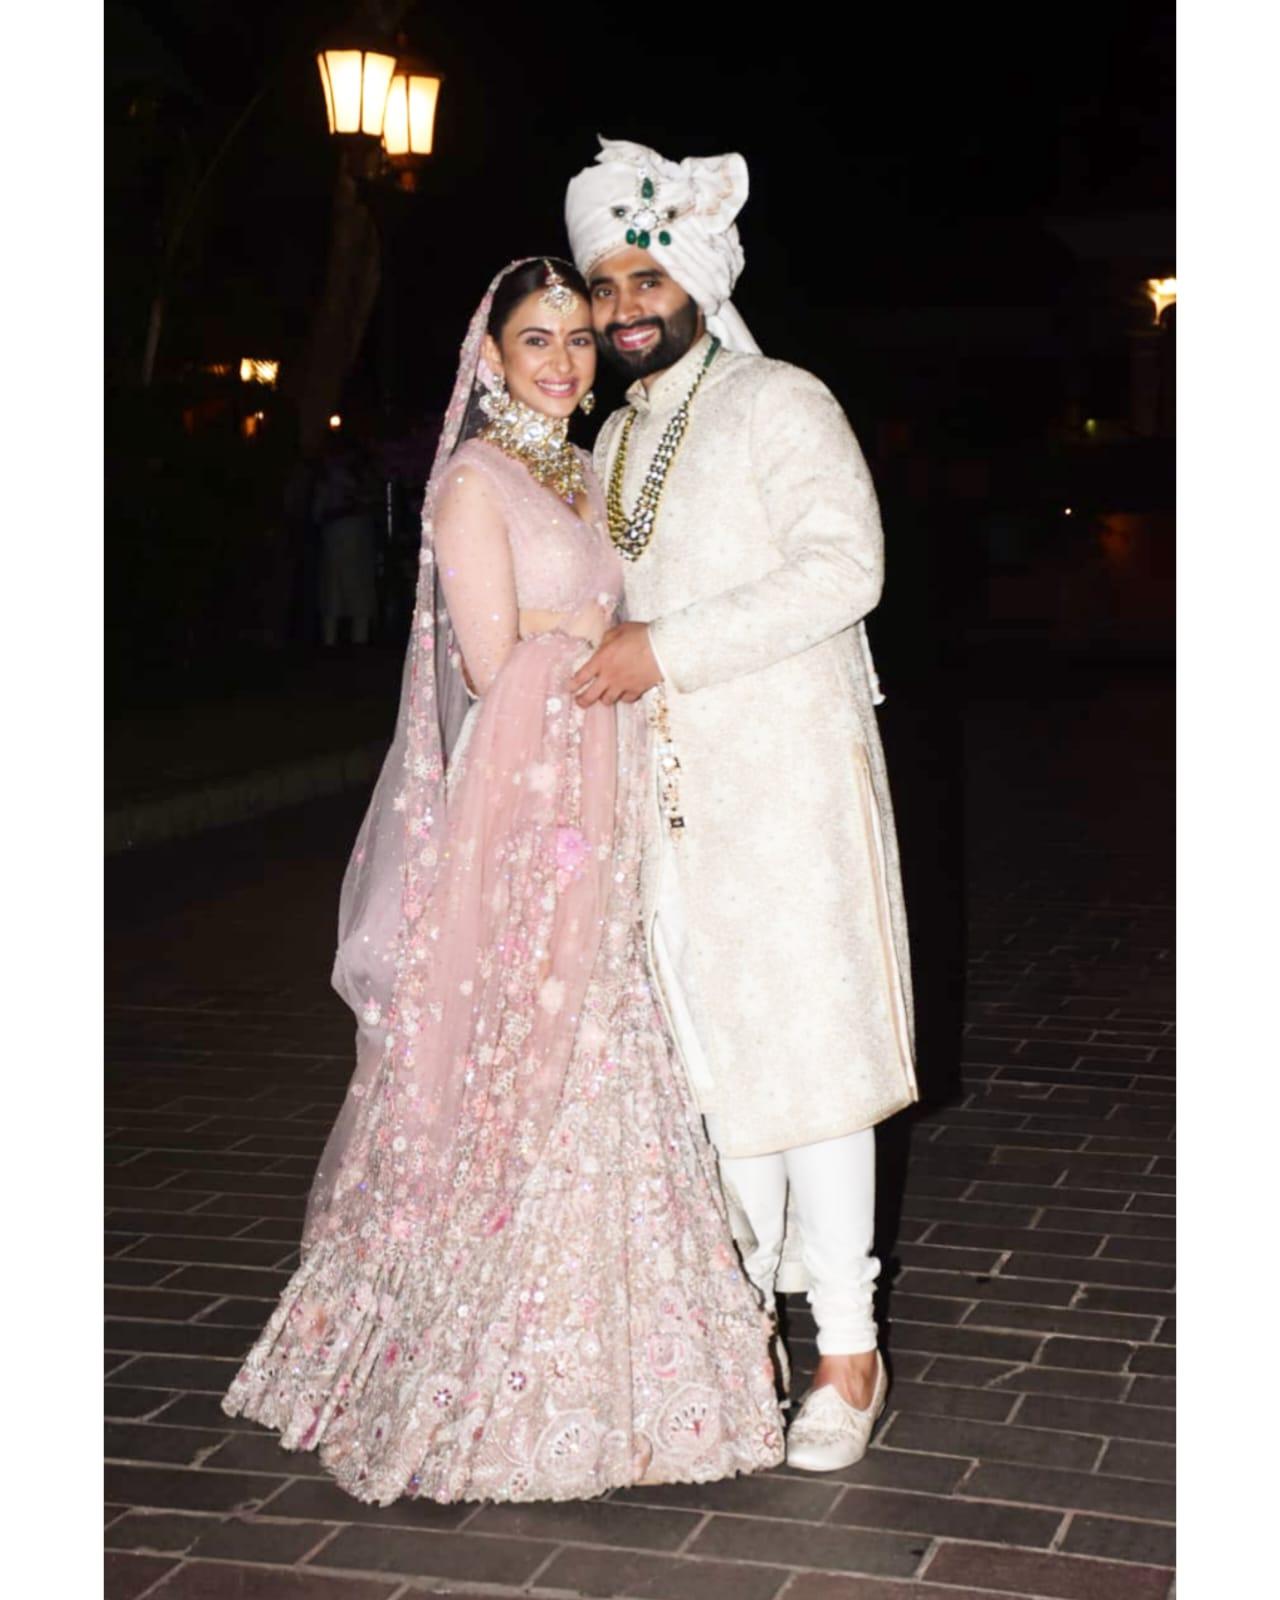 After their wedding Rakul Preet and Jackky made their first public appearance in their wedding dress